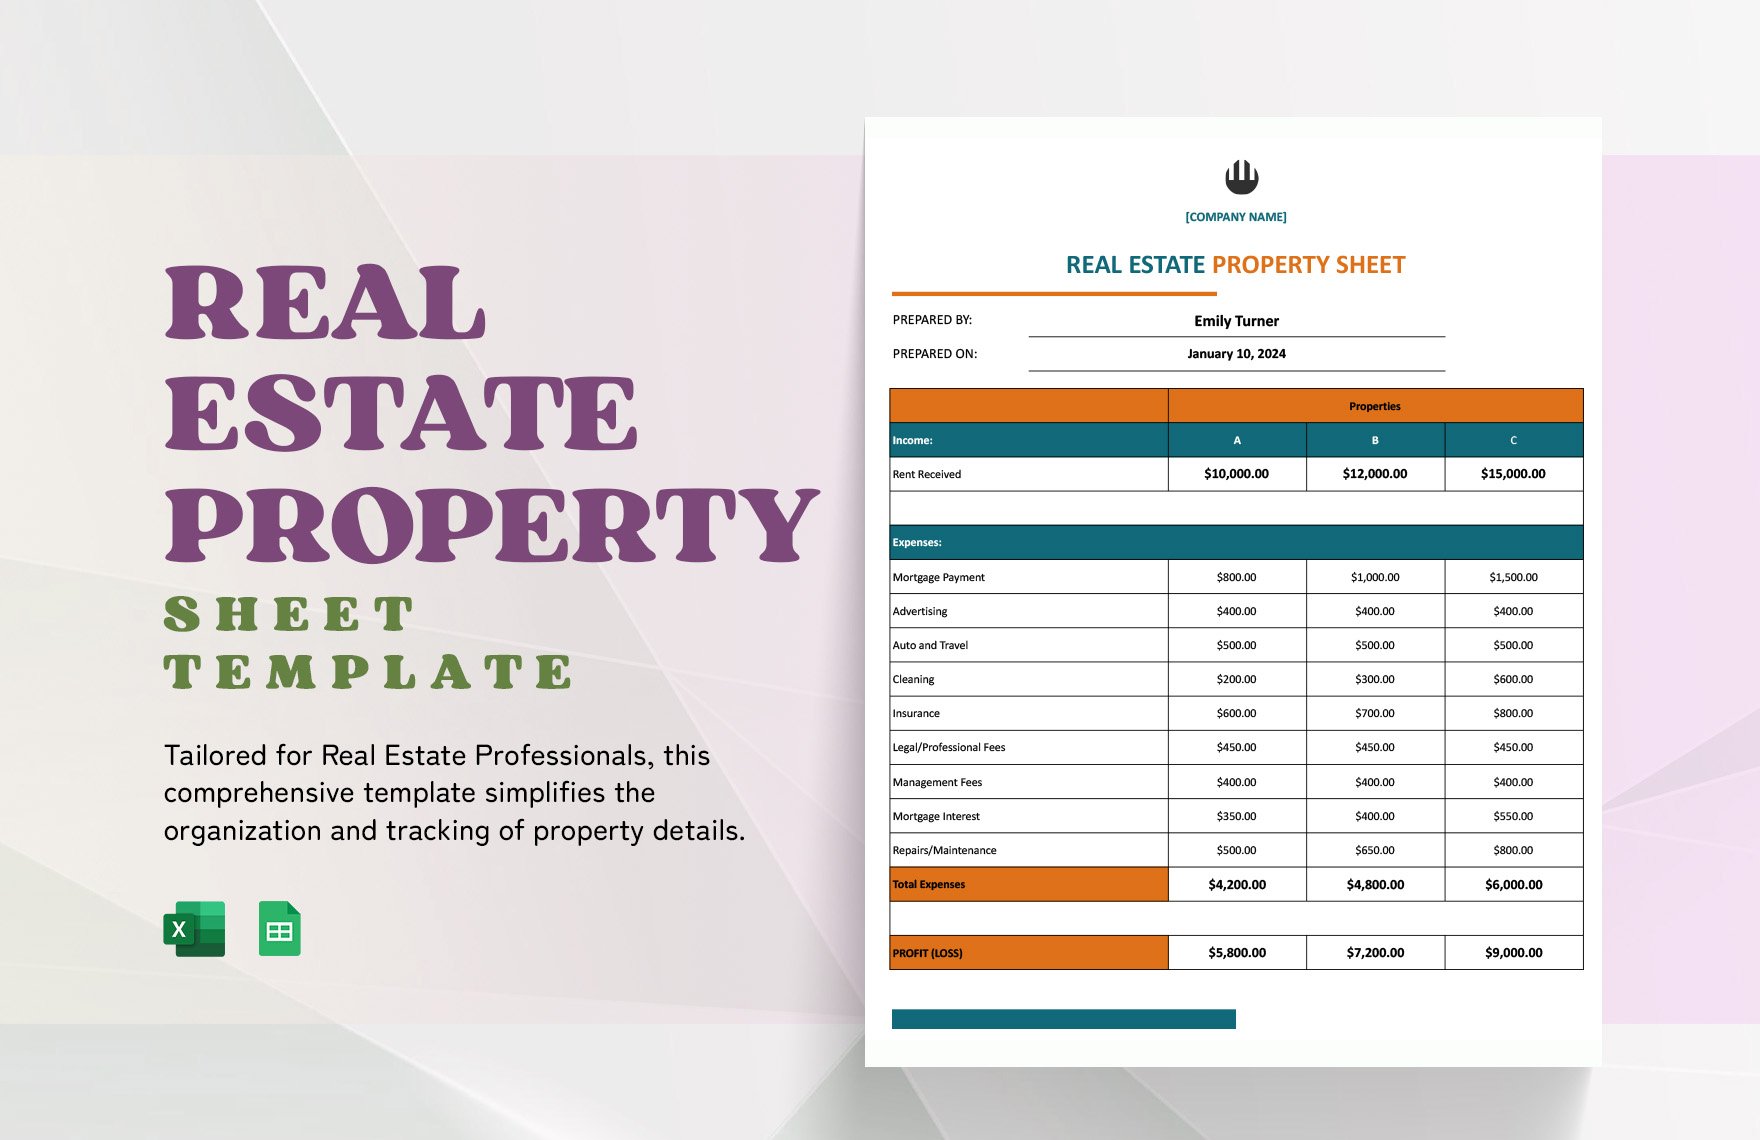 Real Estate Property Sheet Template in Word, Google Docs, Excel, Google Sheets, Apple Numbers